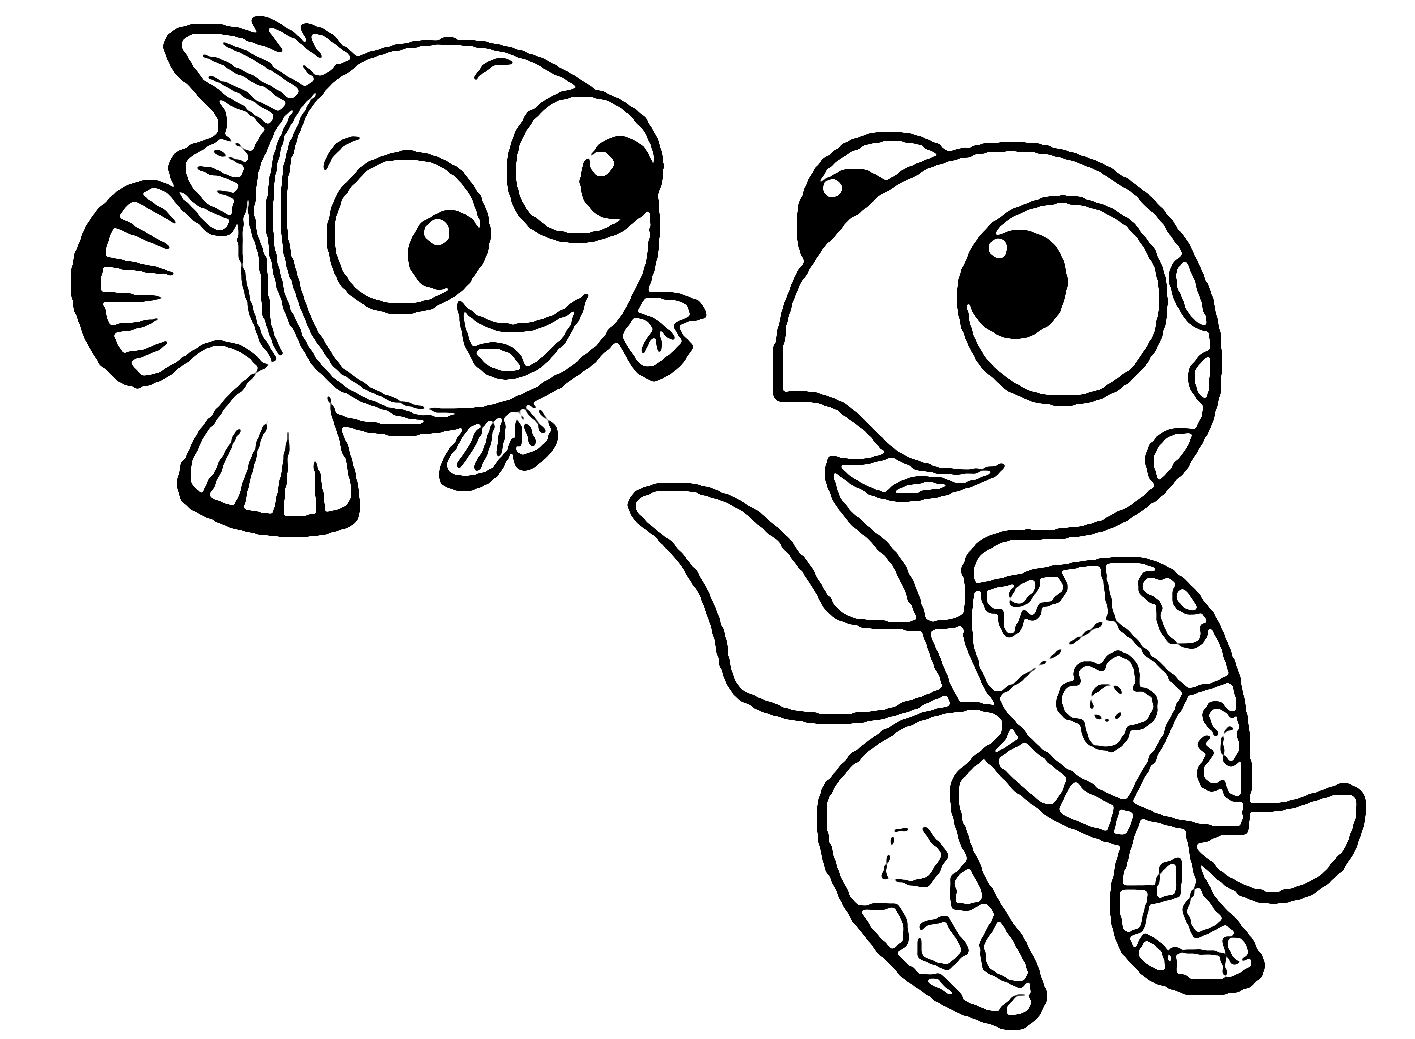 Finding Nemo Turtle and the Fish Coloring Page for Kids